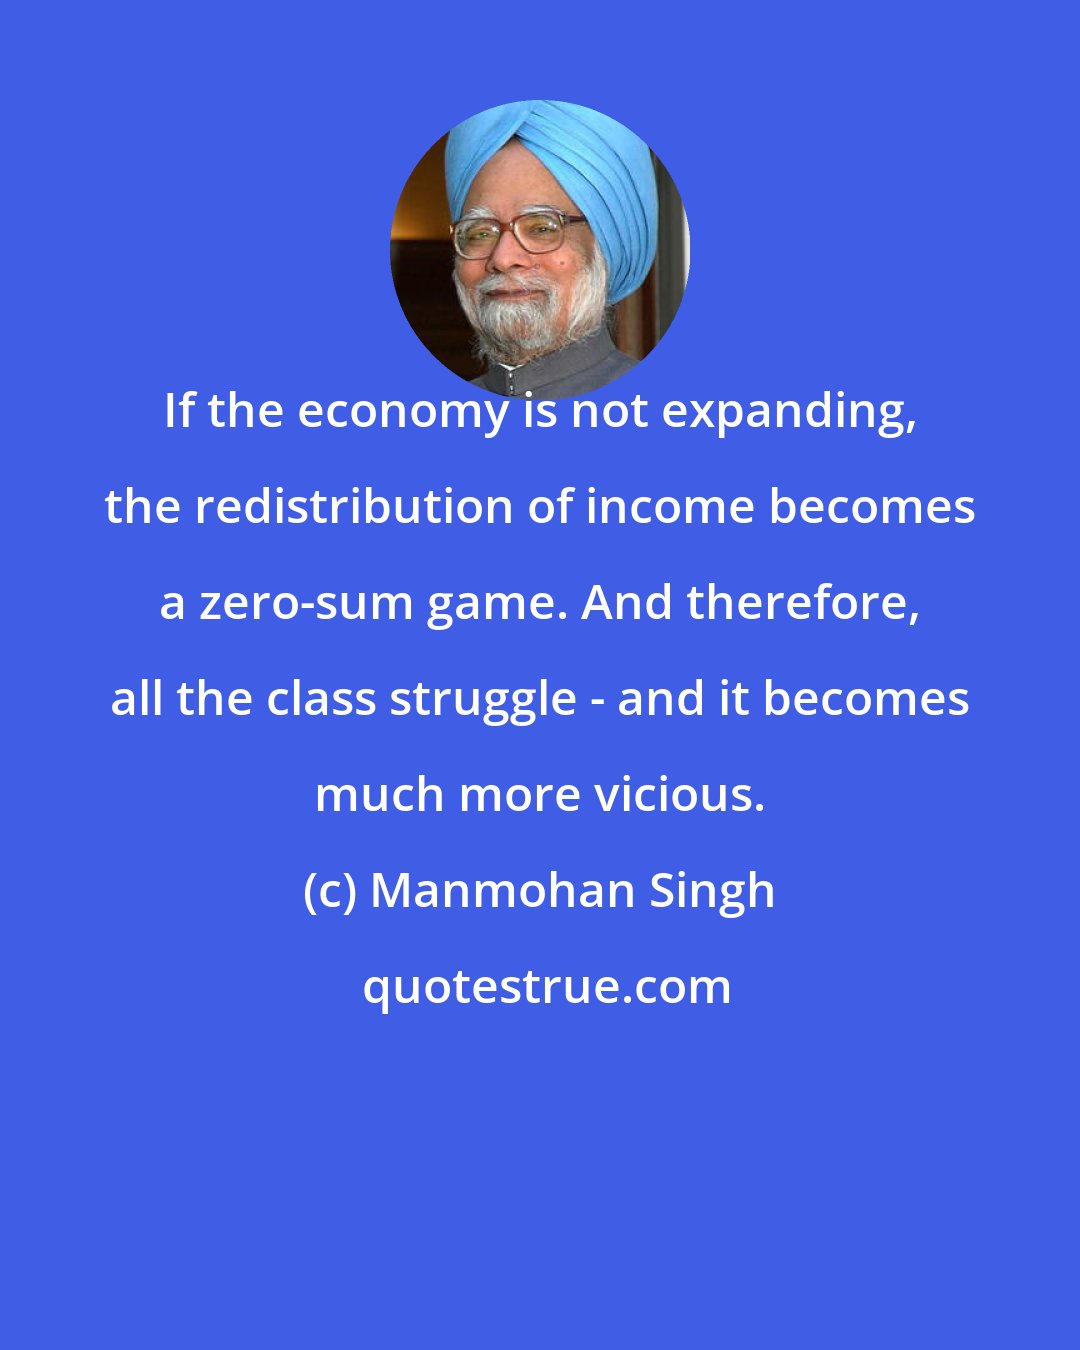 Manmohan Singh: If the economy is not expanding, the redistribution of income becomes a zero-sum game. And therefore, all the class struggle - and it becomes much more vicious.